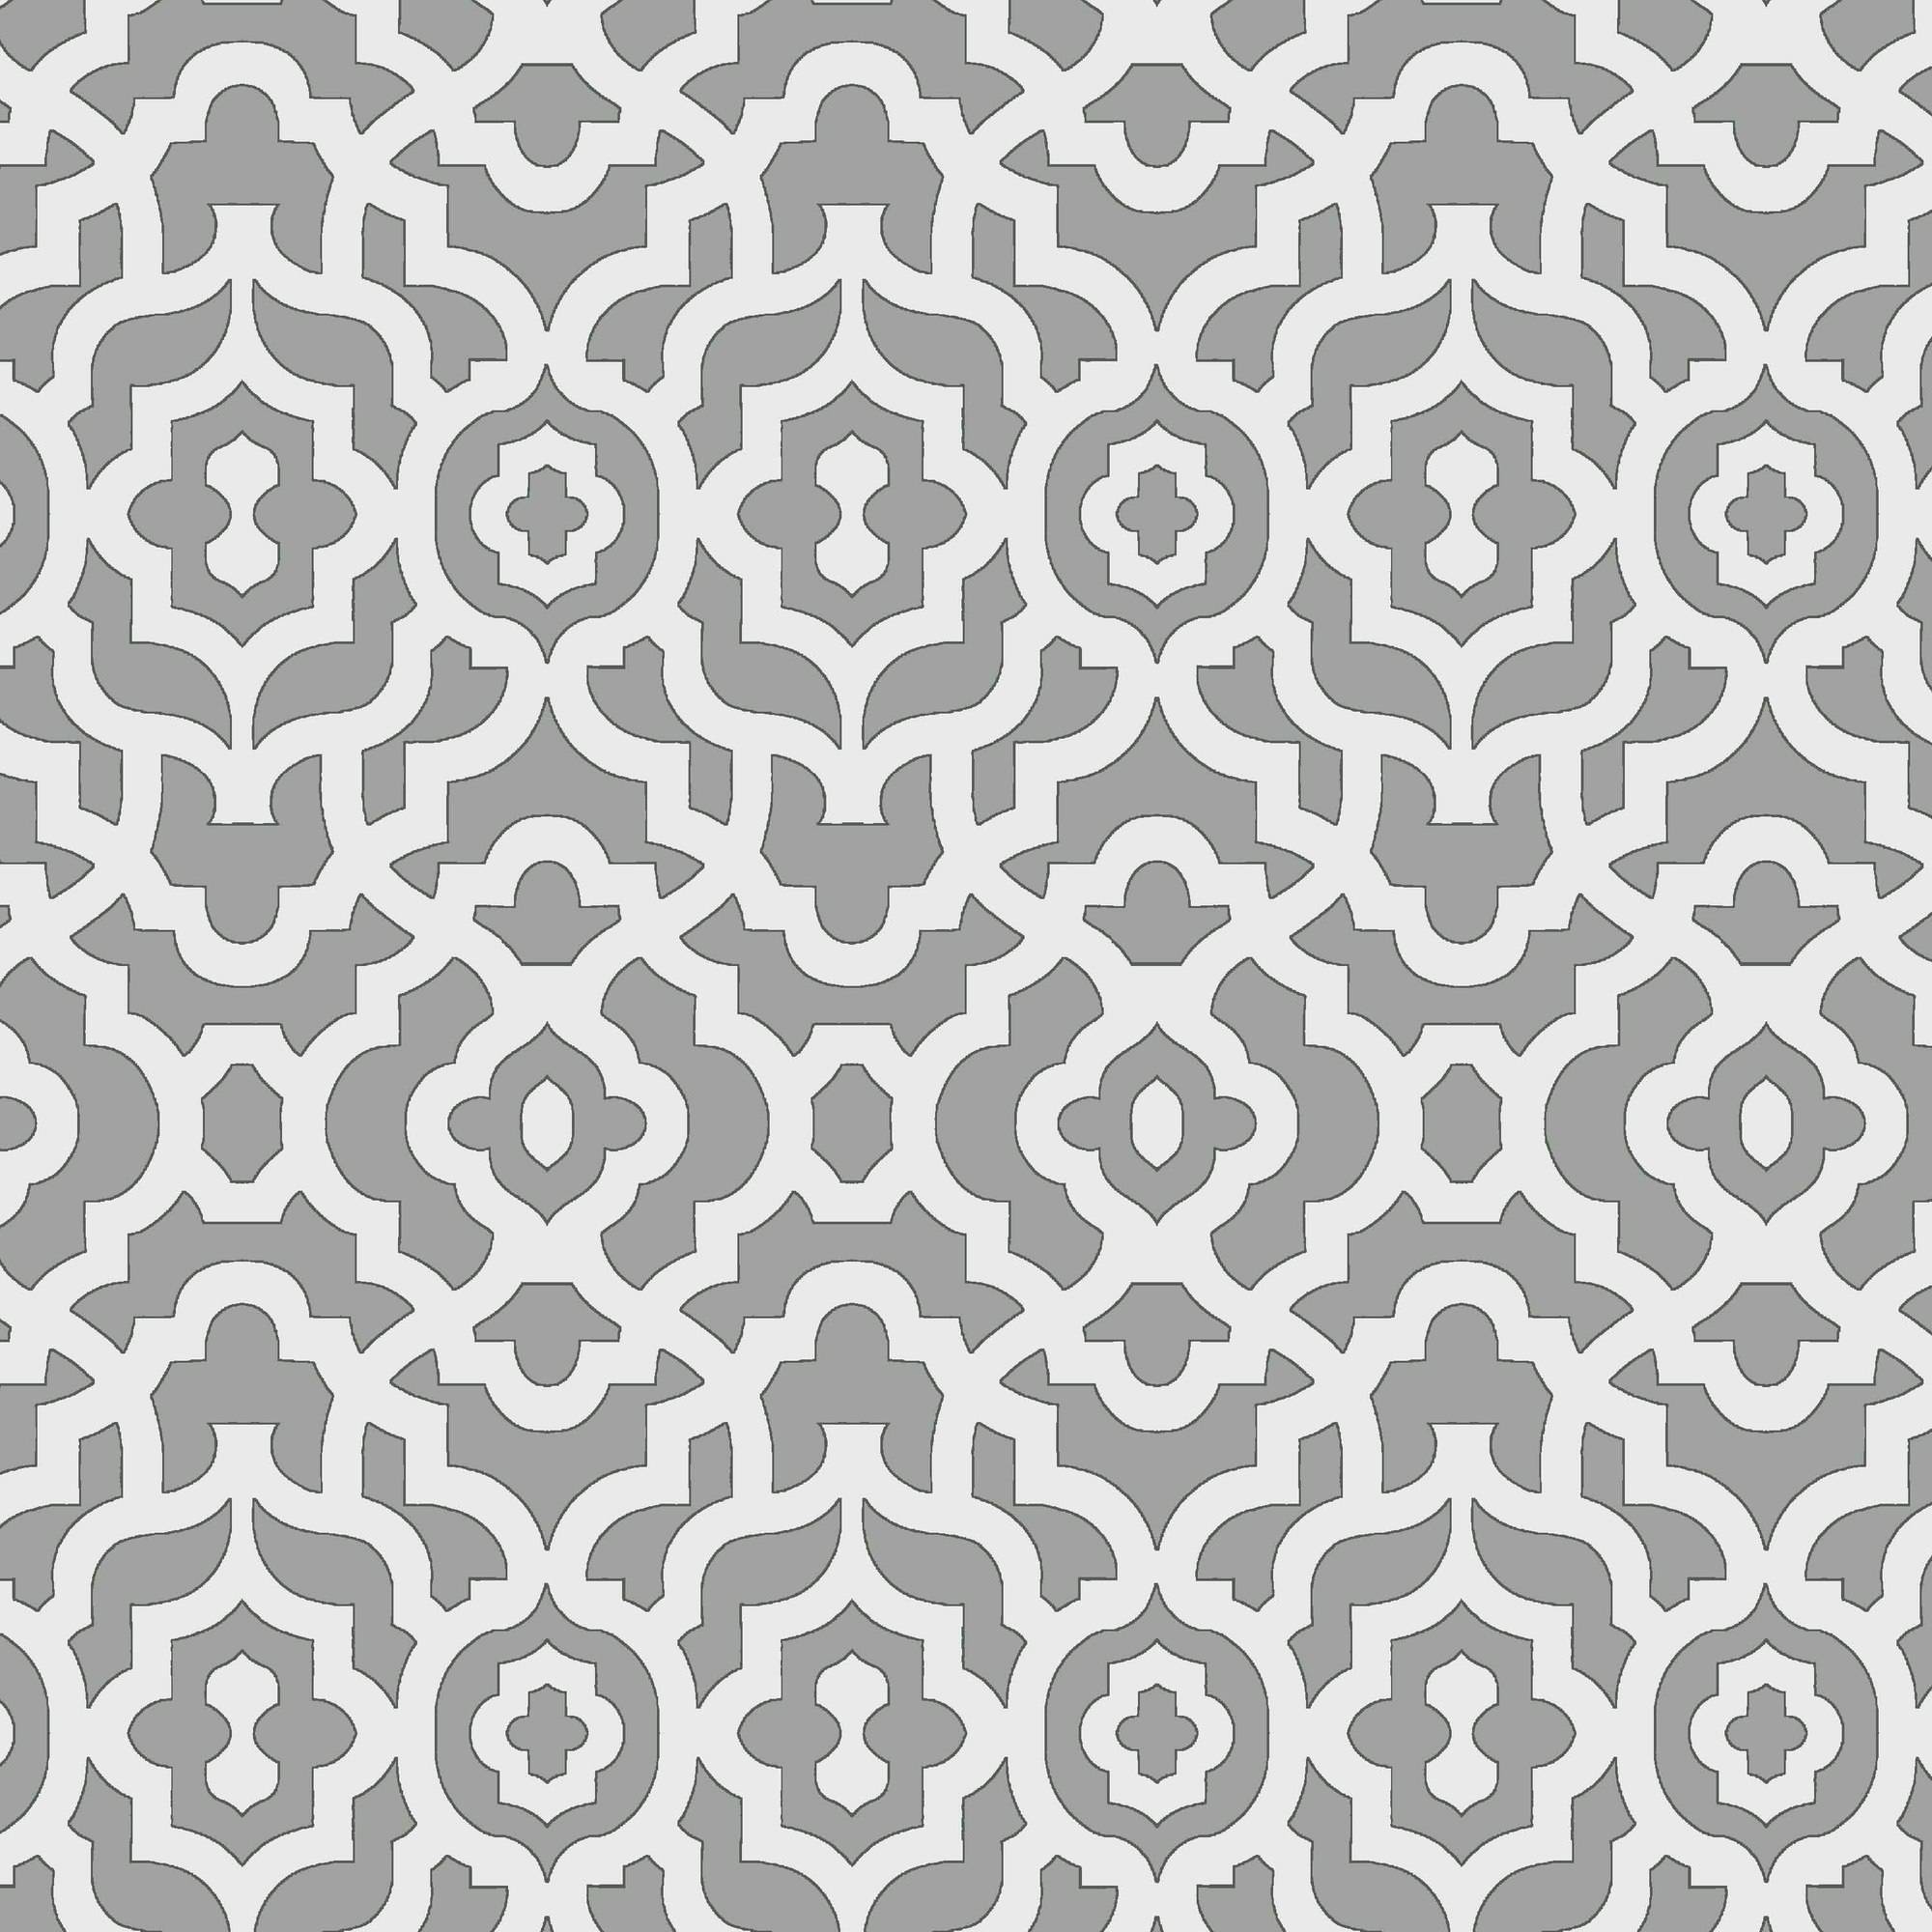 Waverly Inspirations 100% Cotton Duck 45" Width Lattice Print Grey Color Sewing Fabric by the Yard